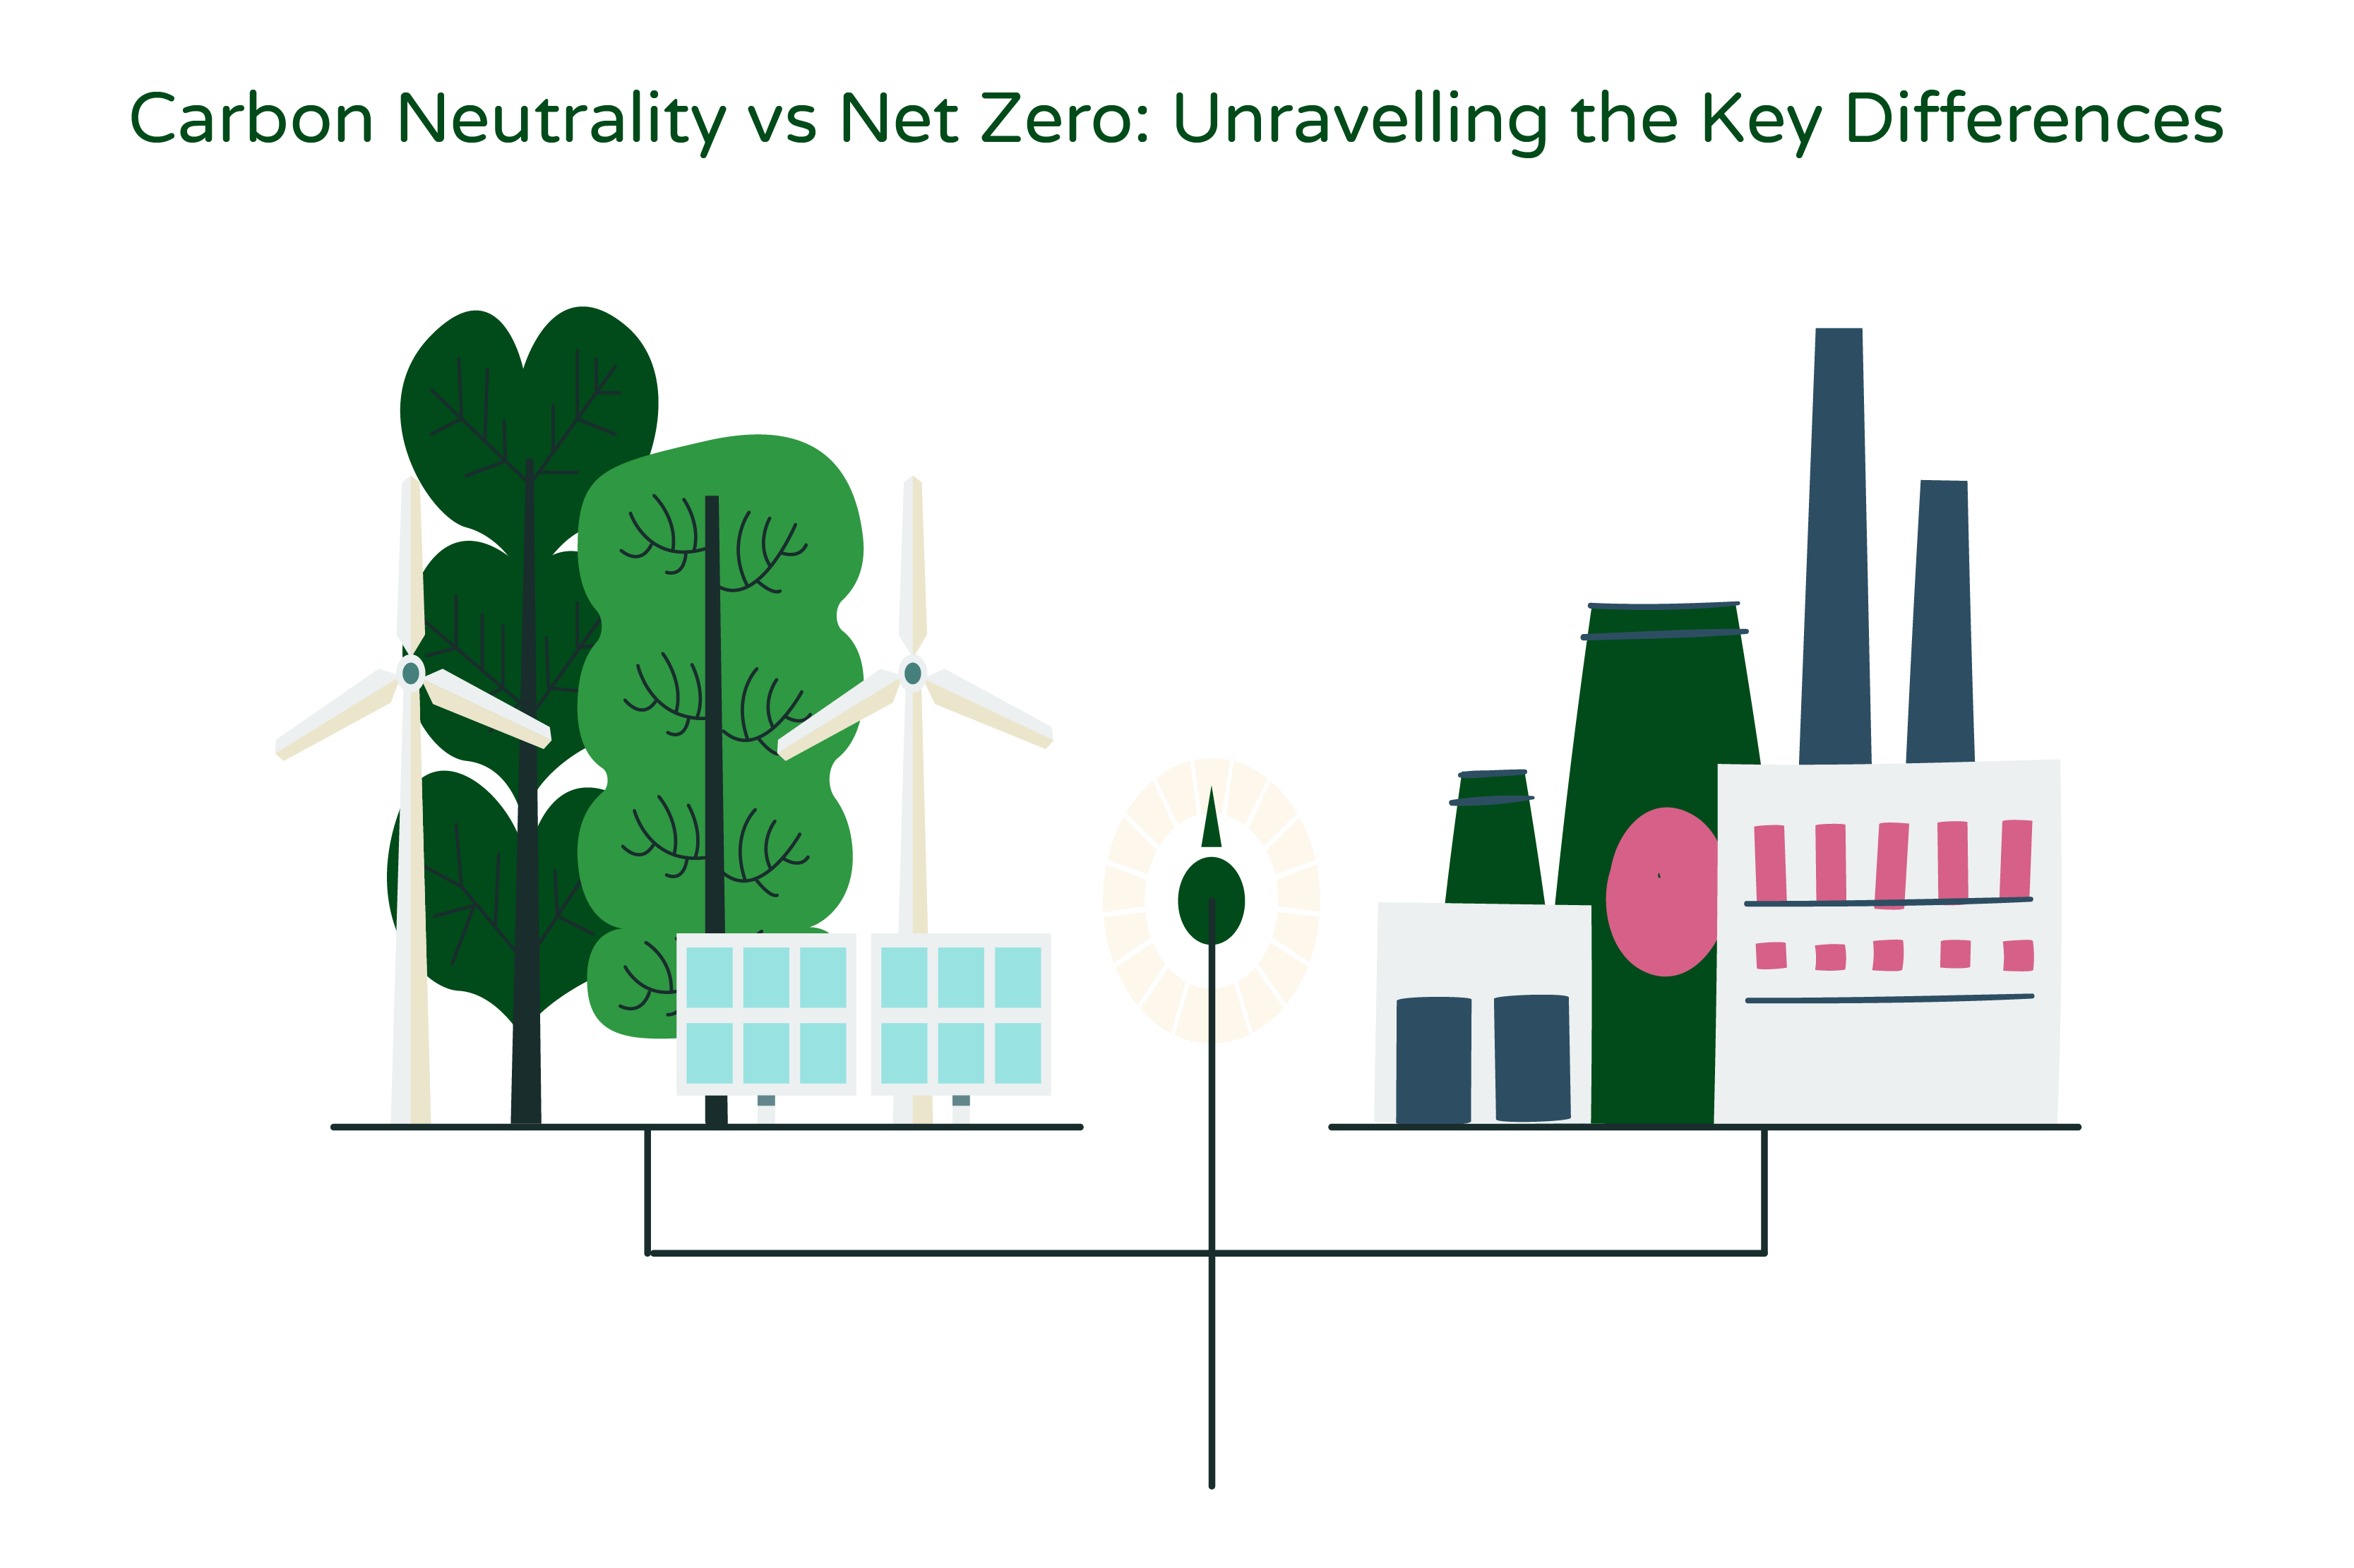 Illustration titled 'Carbon Neutrality vs Net Zero: Unravelling the Key Differences.' The illustration features a scale with a sustainable environment depicted on one side and industry represented on the other side, symbolizing the contrasting visions associated with the concepts of carbon neutrality and net zero.